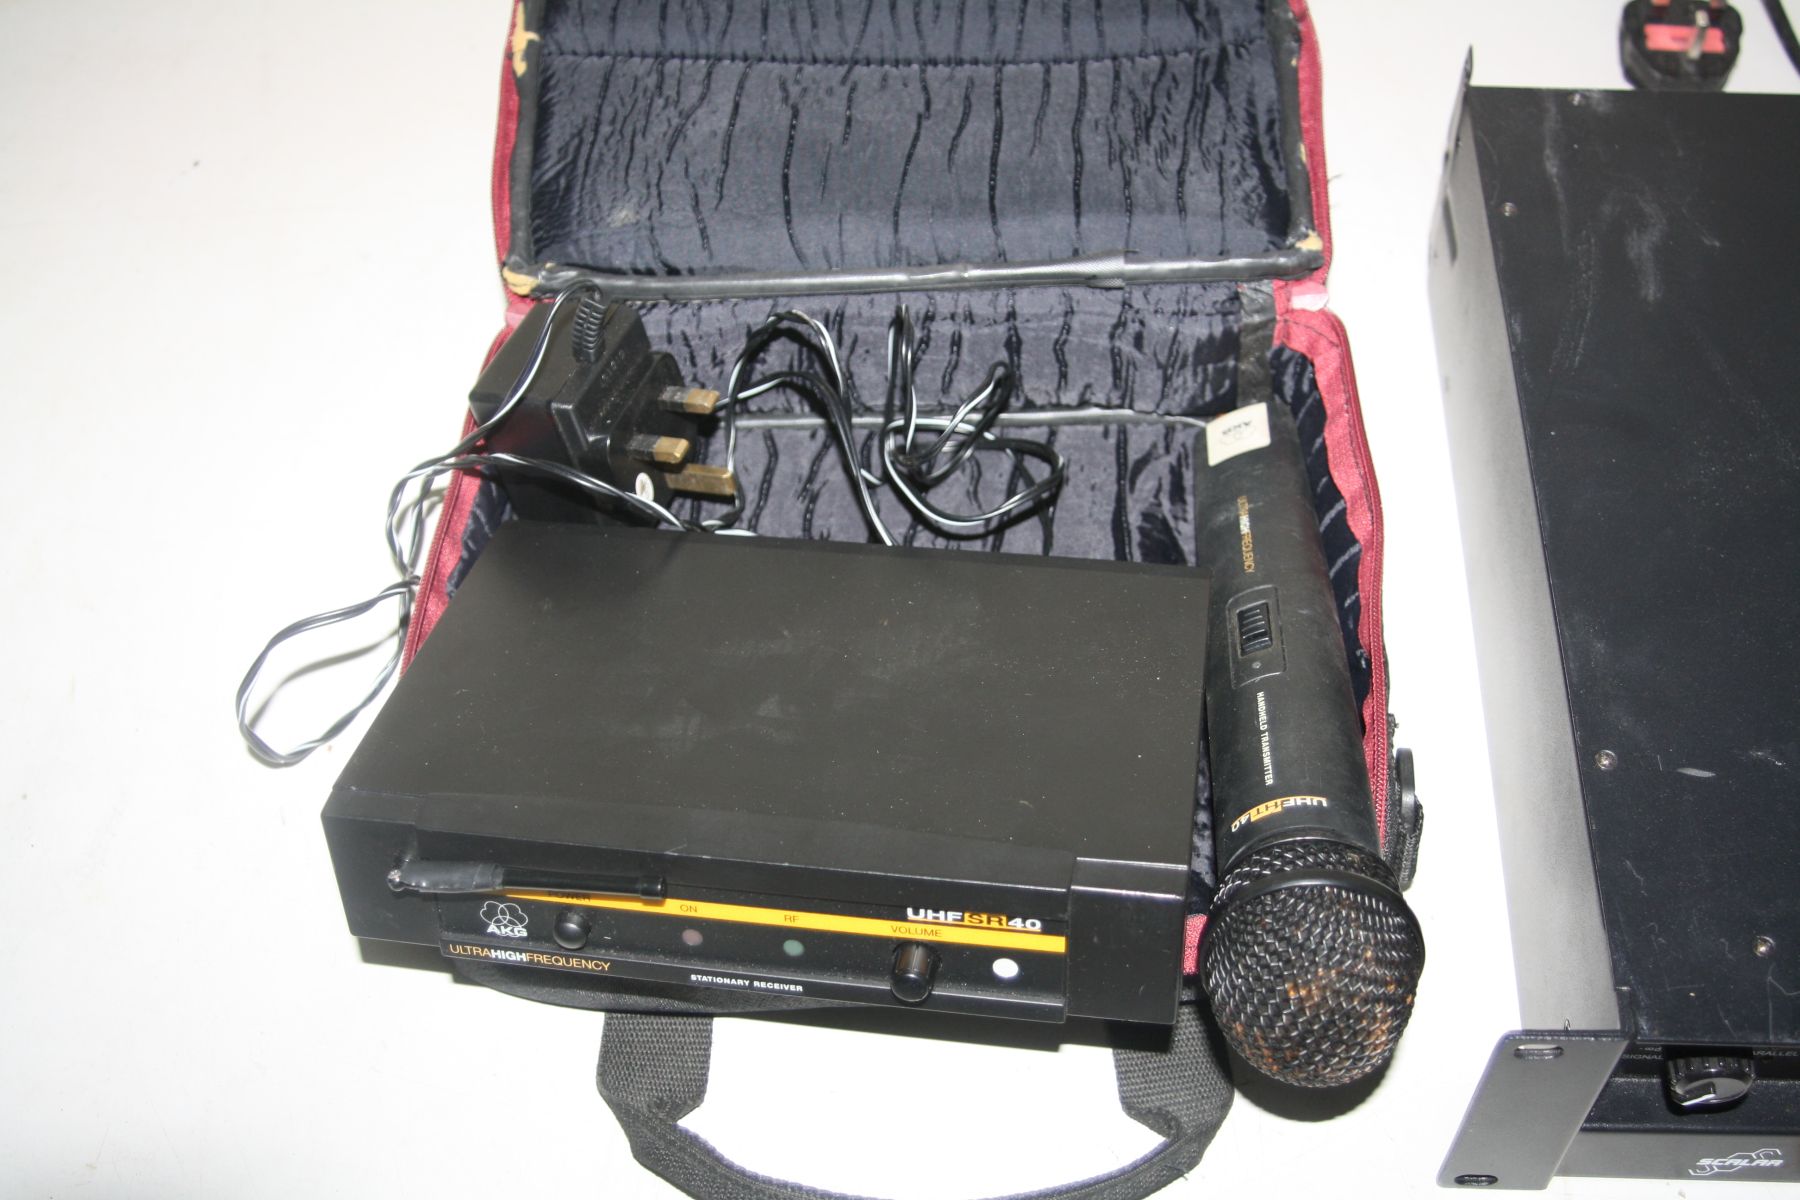 A HH SR900 POWER AMPLIFIER and an AKG radio Mic with Handheld Mic (both PAT pass and amp and - Image 2 of 2